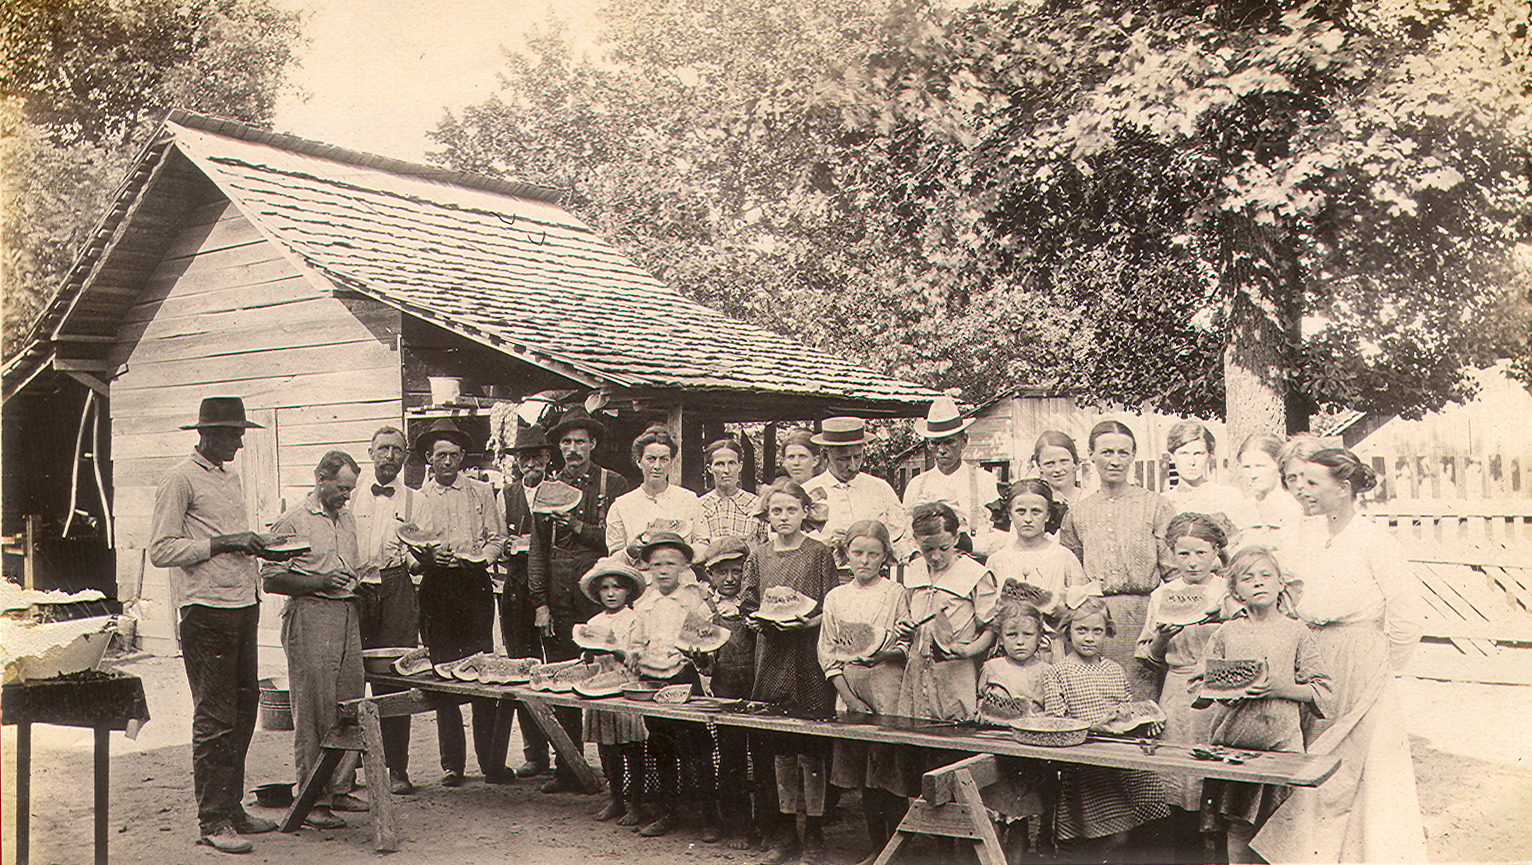 Group eating watermelon, ca. 1915. From the Mablevale Home Demonstration Club Records (MC 1640), box 5, folder 1, image 57, Special Collections, University of Arkansas Libraries. 